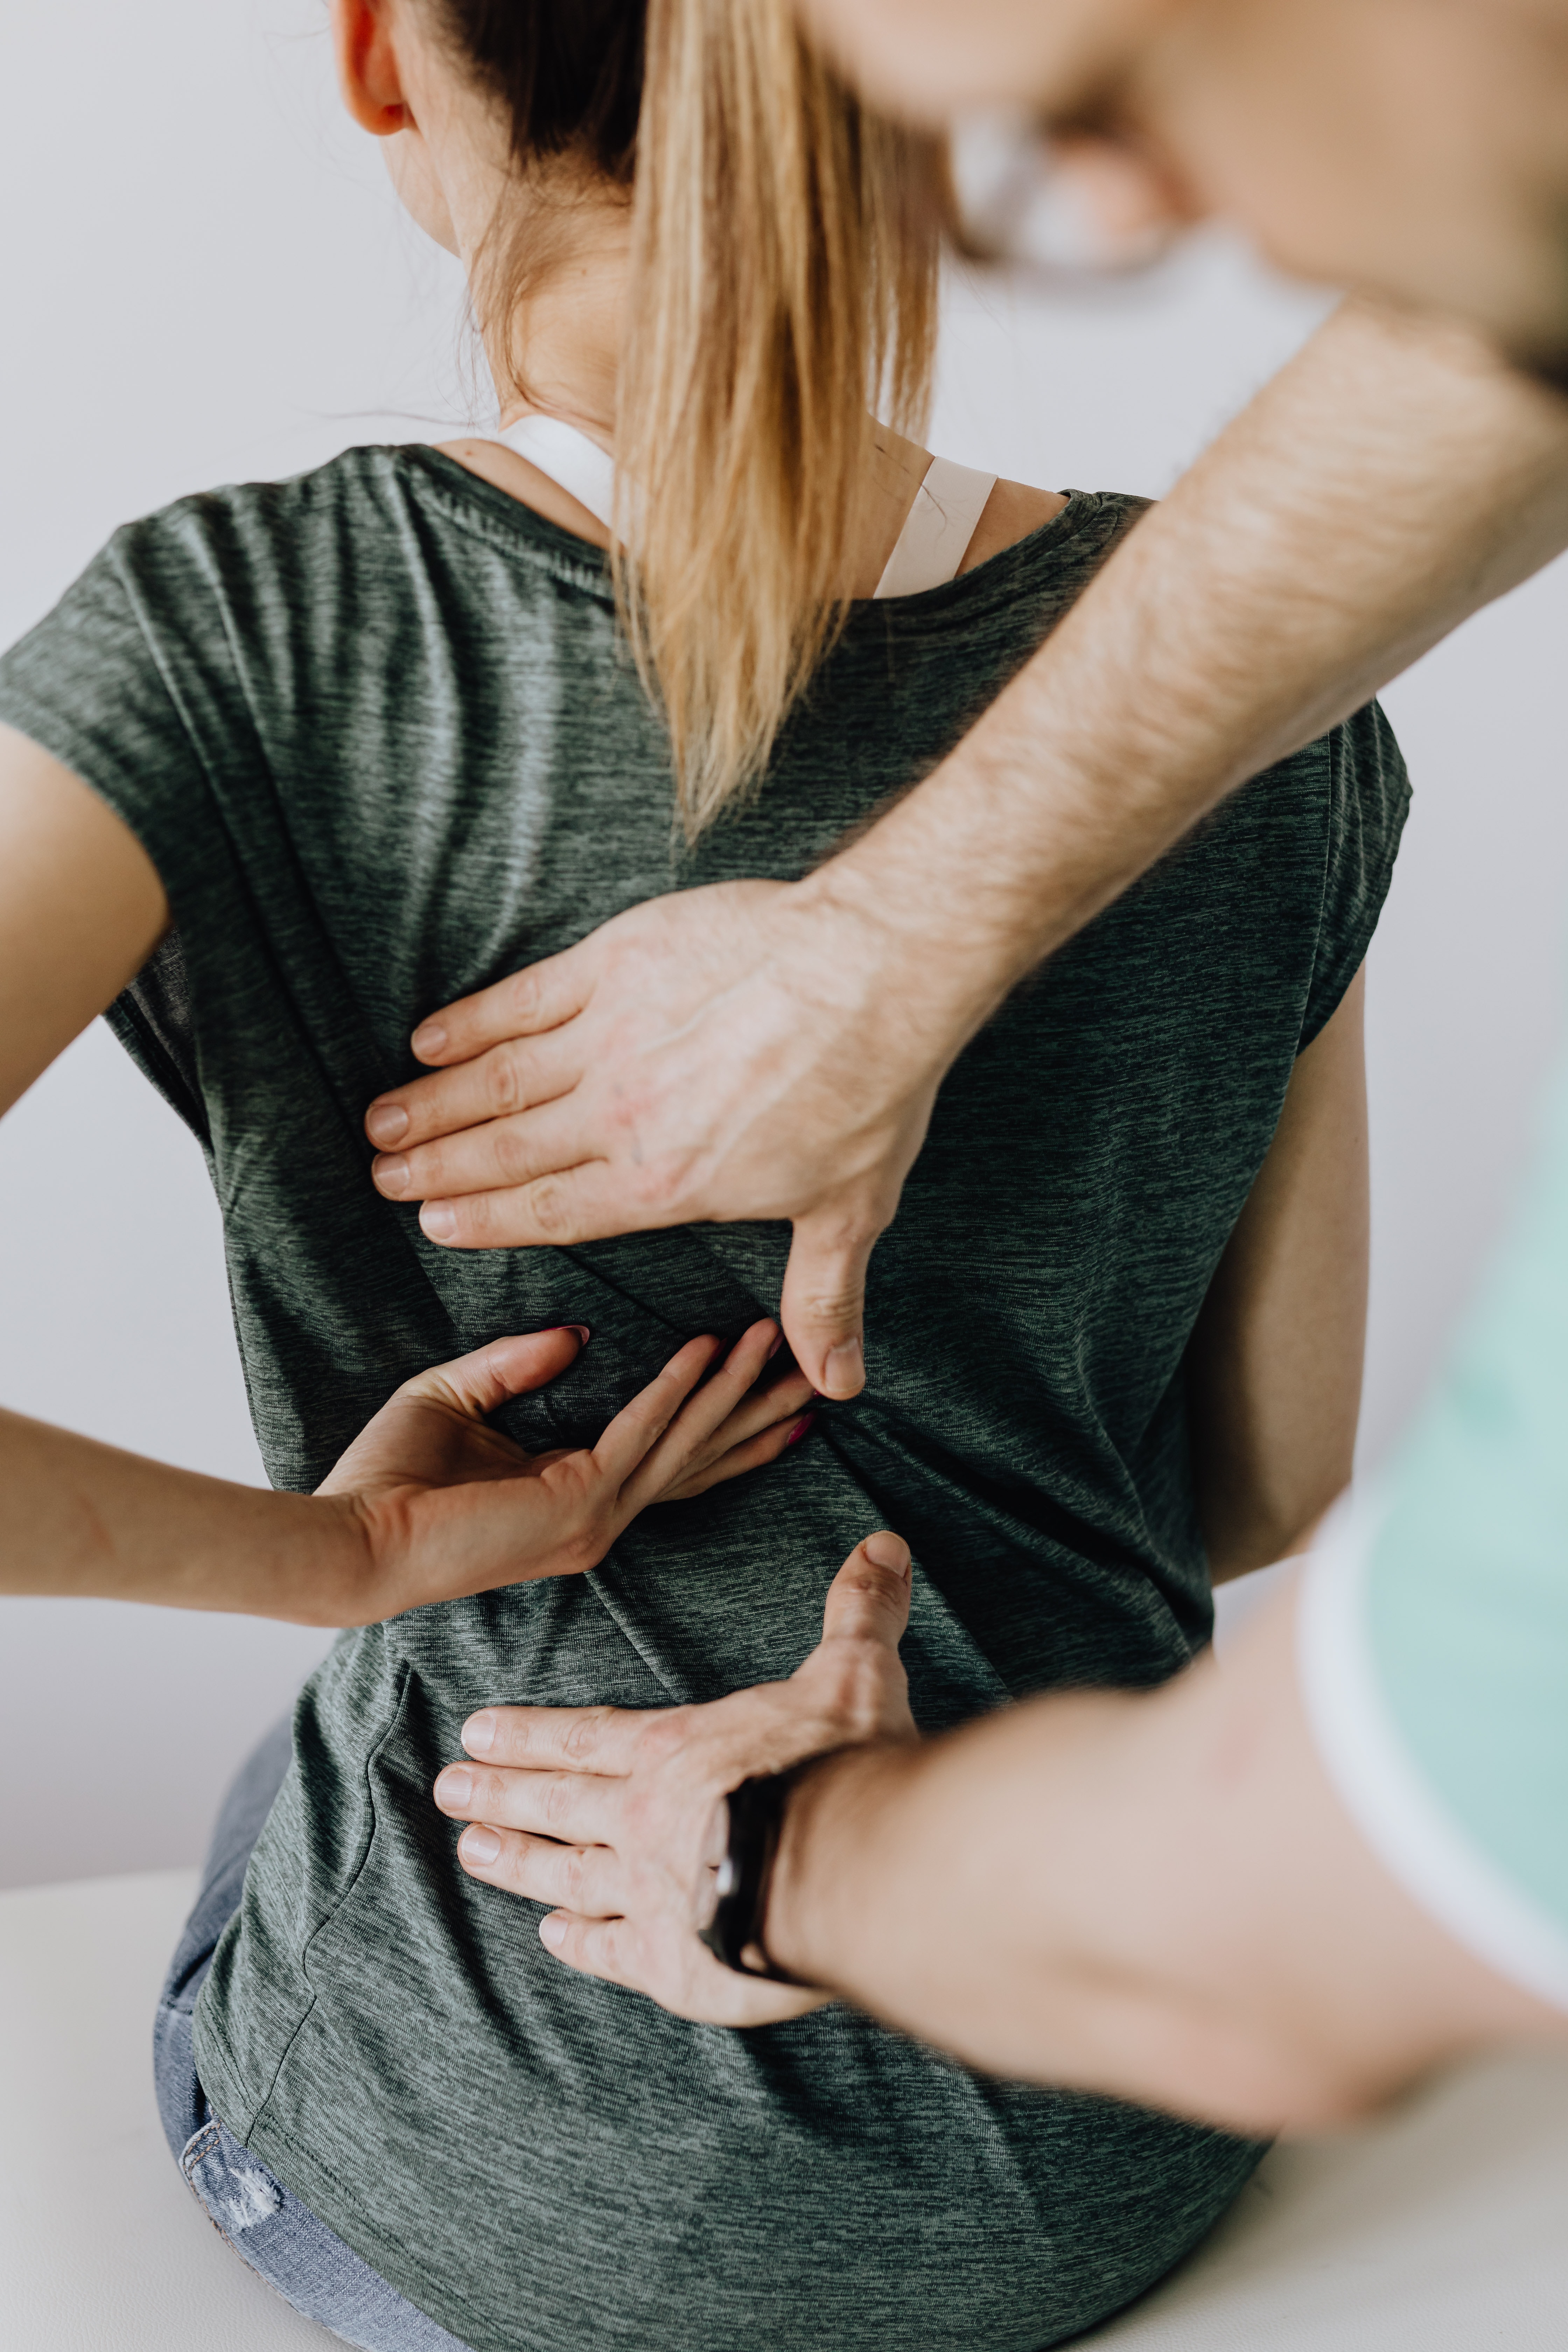  Healing Lower Back Pain - Physiotherapy Is The Best Choice